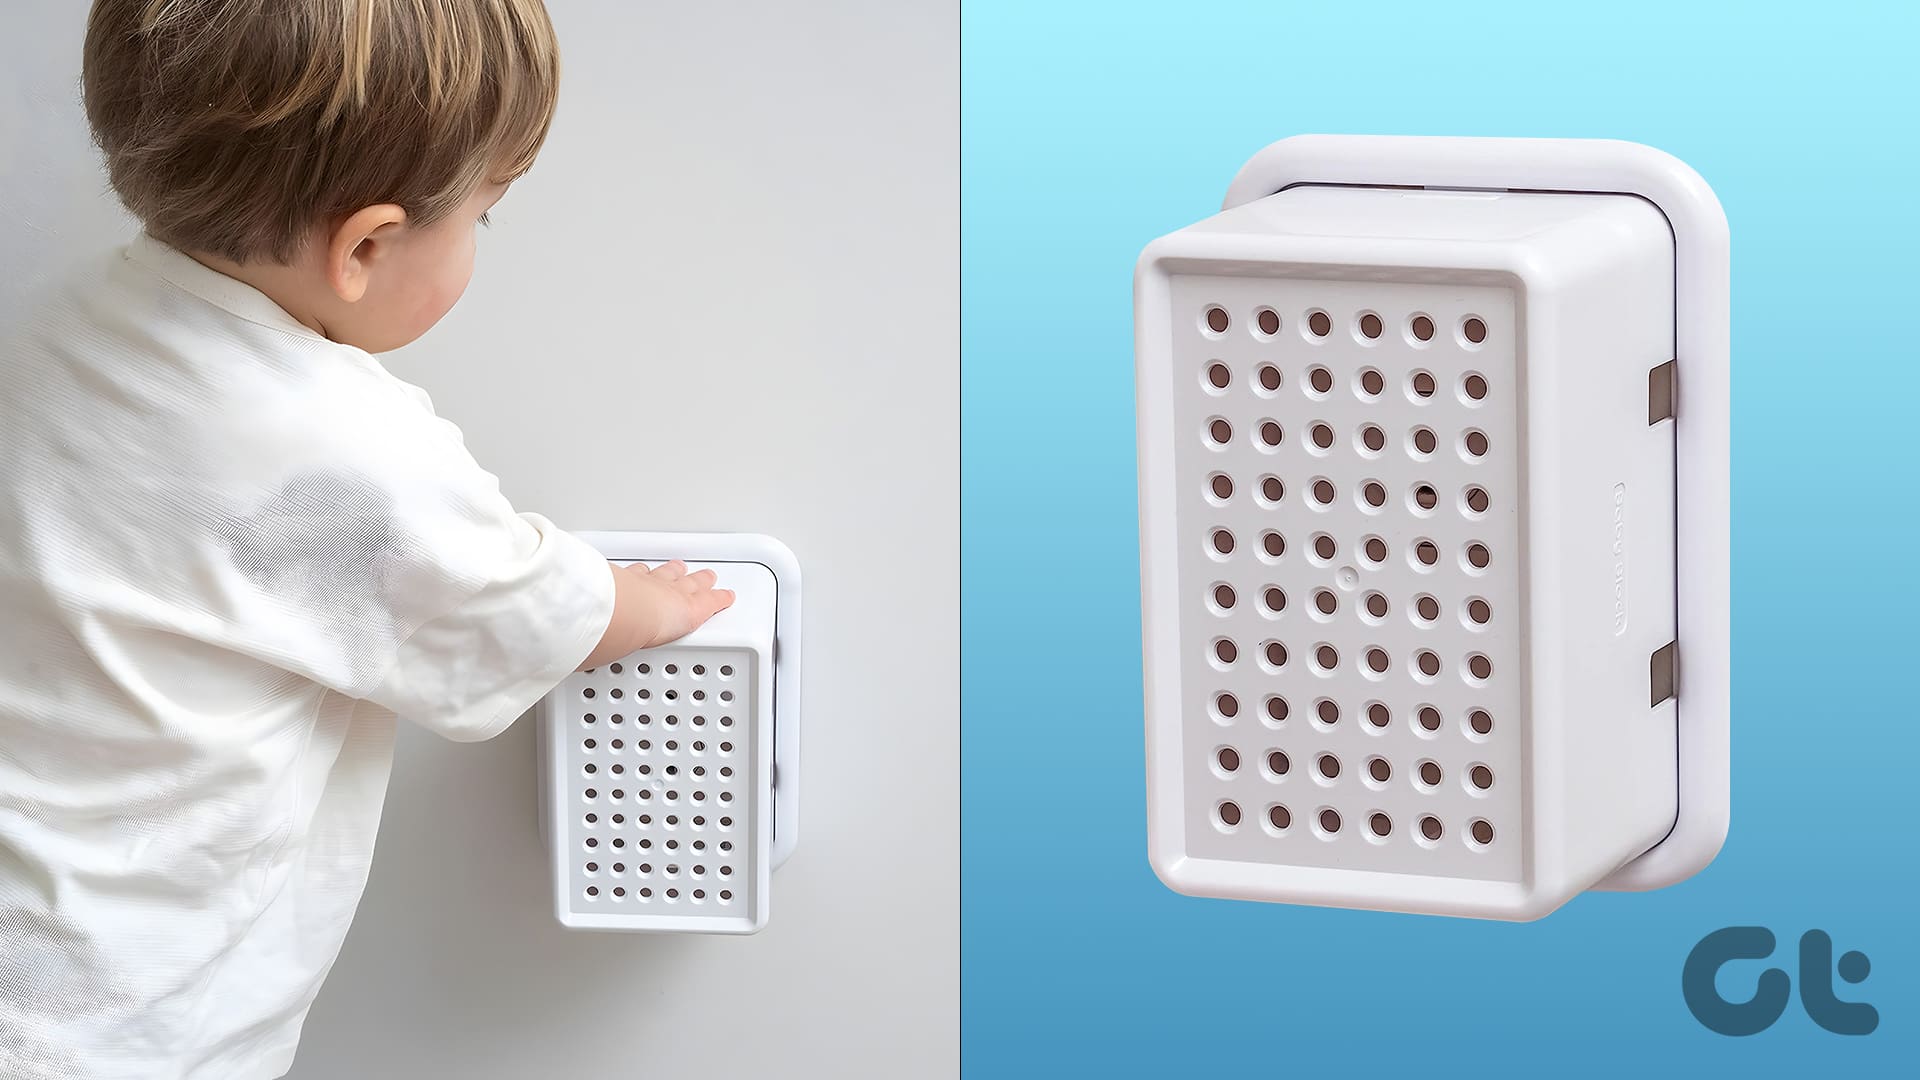 Best Outlet Covers for Baby Proofing featured